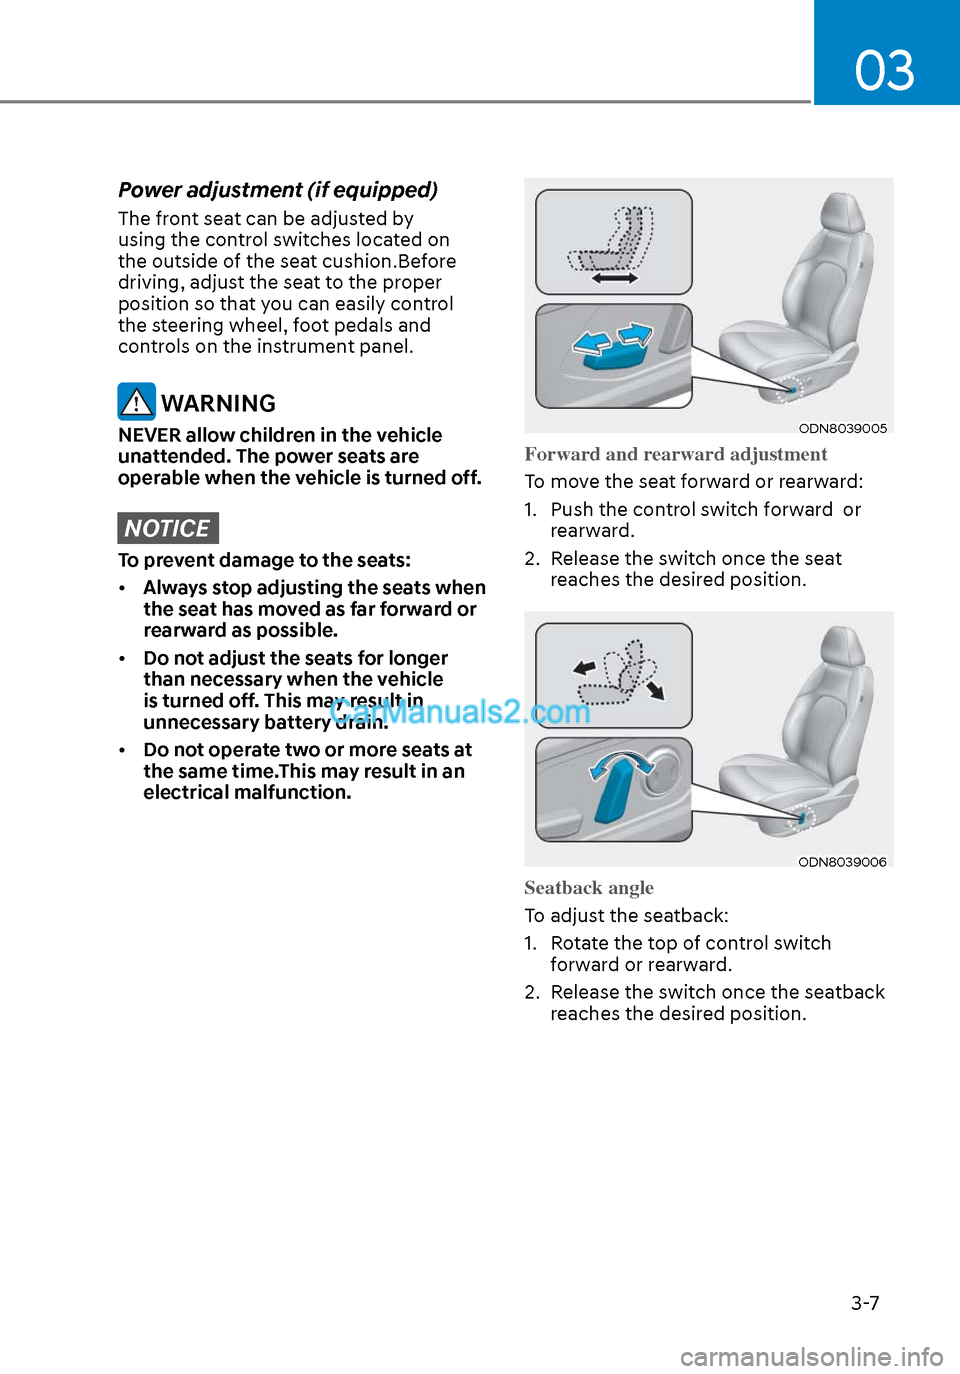 Hyundai Sonata 2020  Owners Manual 03
3-7
Power adjustment (if equipped) 
The front seat can be adjusted by 
using the control switches located on 
the outside of the seat cushion.Before 
driving, adjust the seat to the proper 
positio